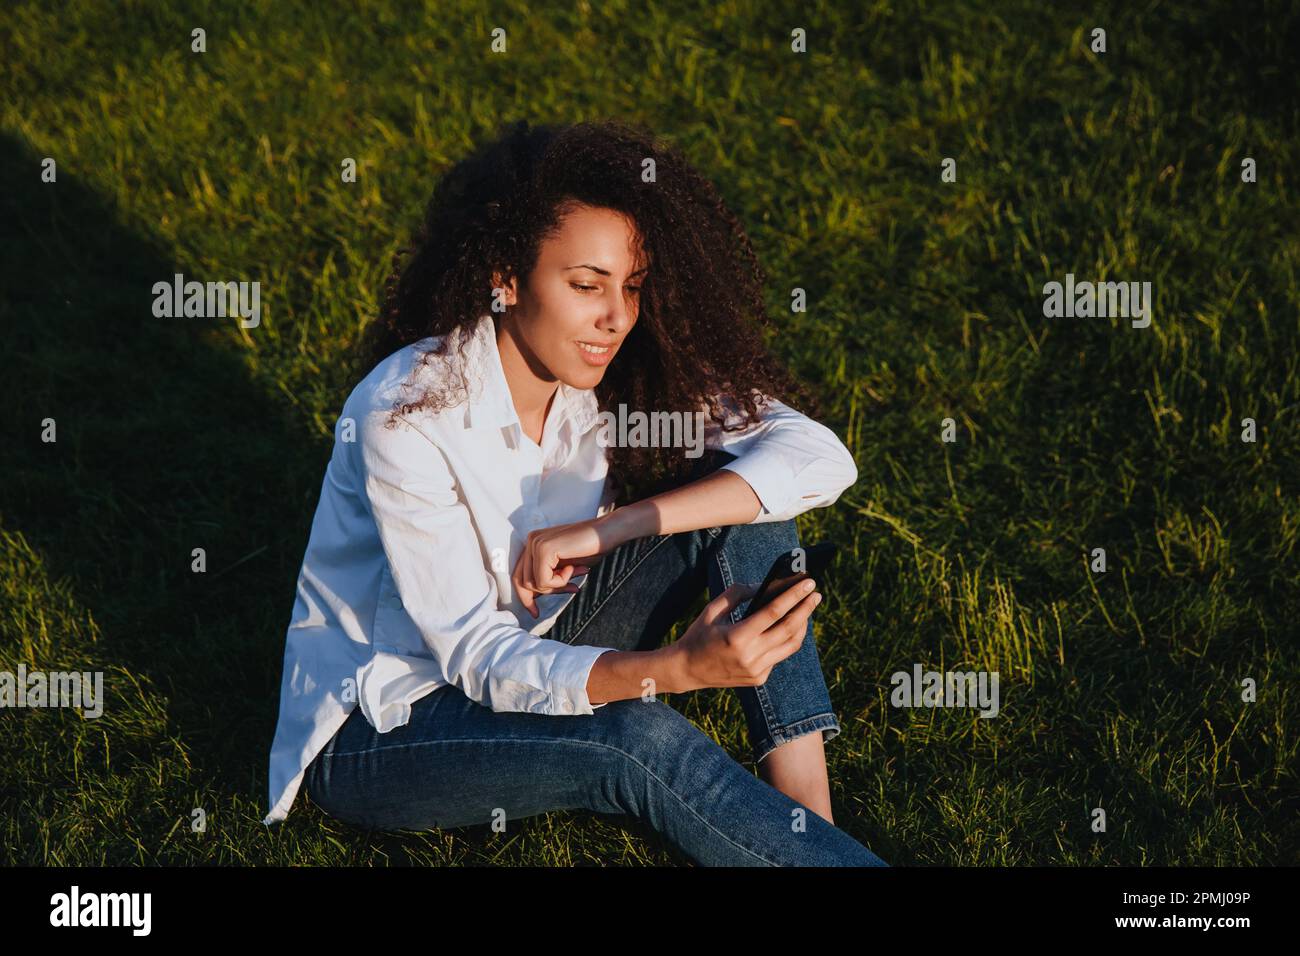 A young girl sits on the green grass in the park and uses social networks using a mobile phone. Stock Photo